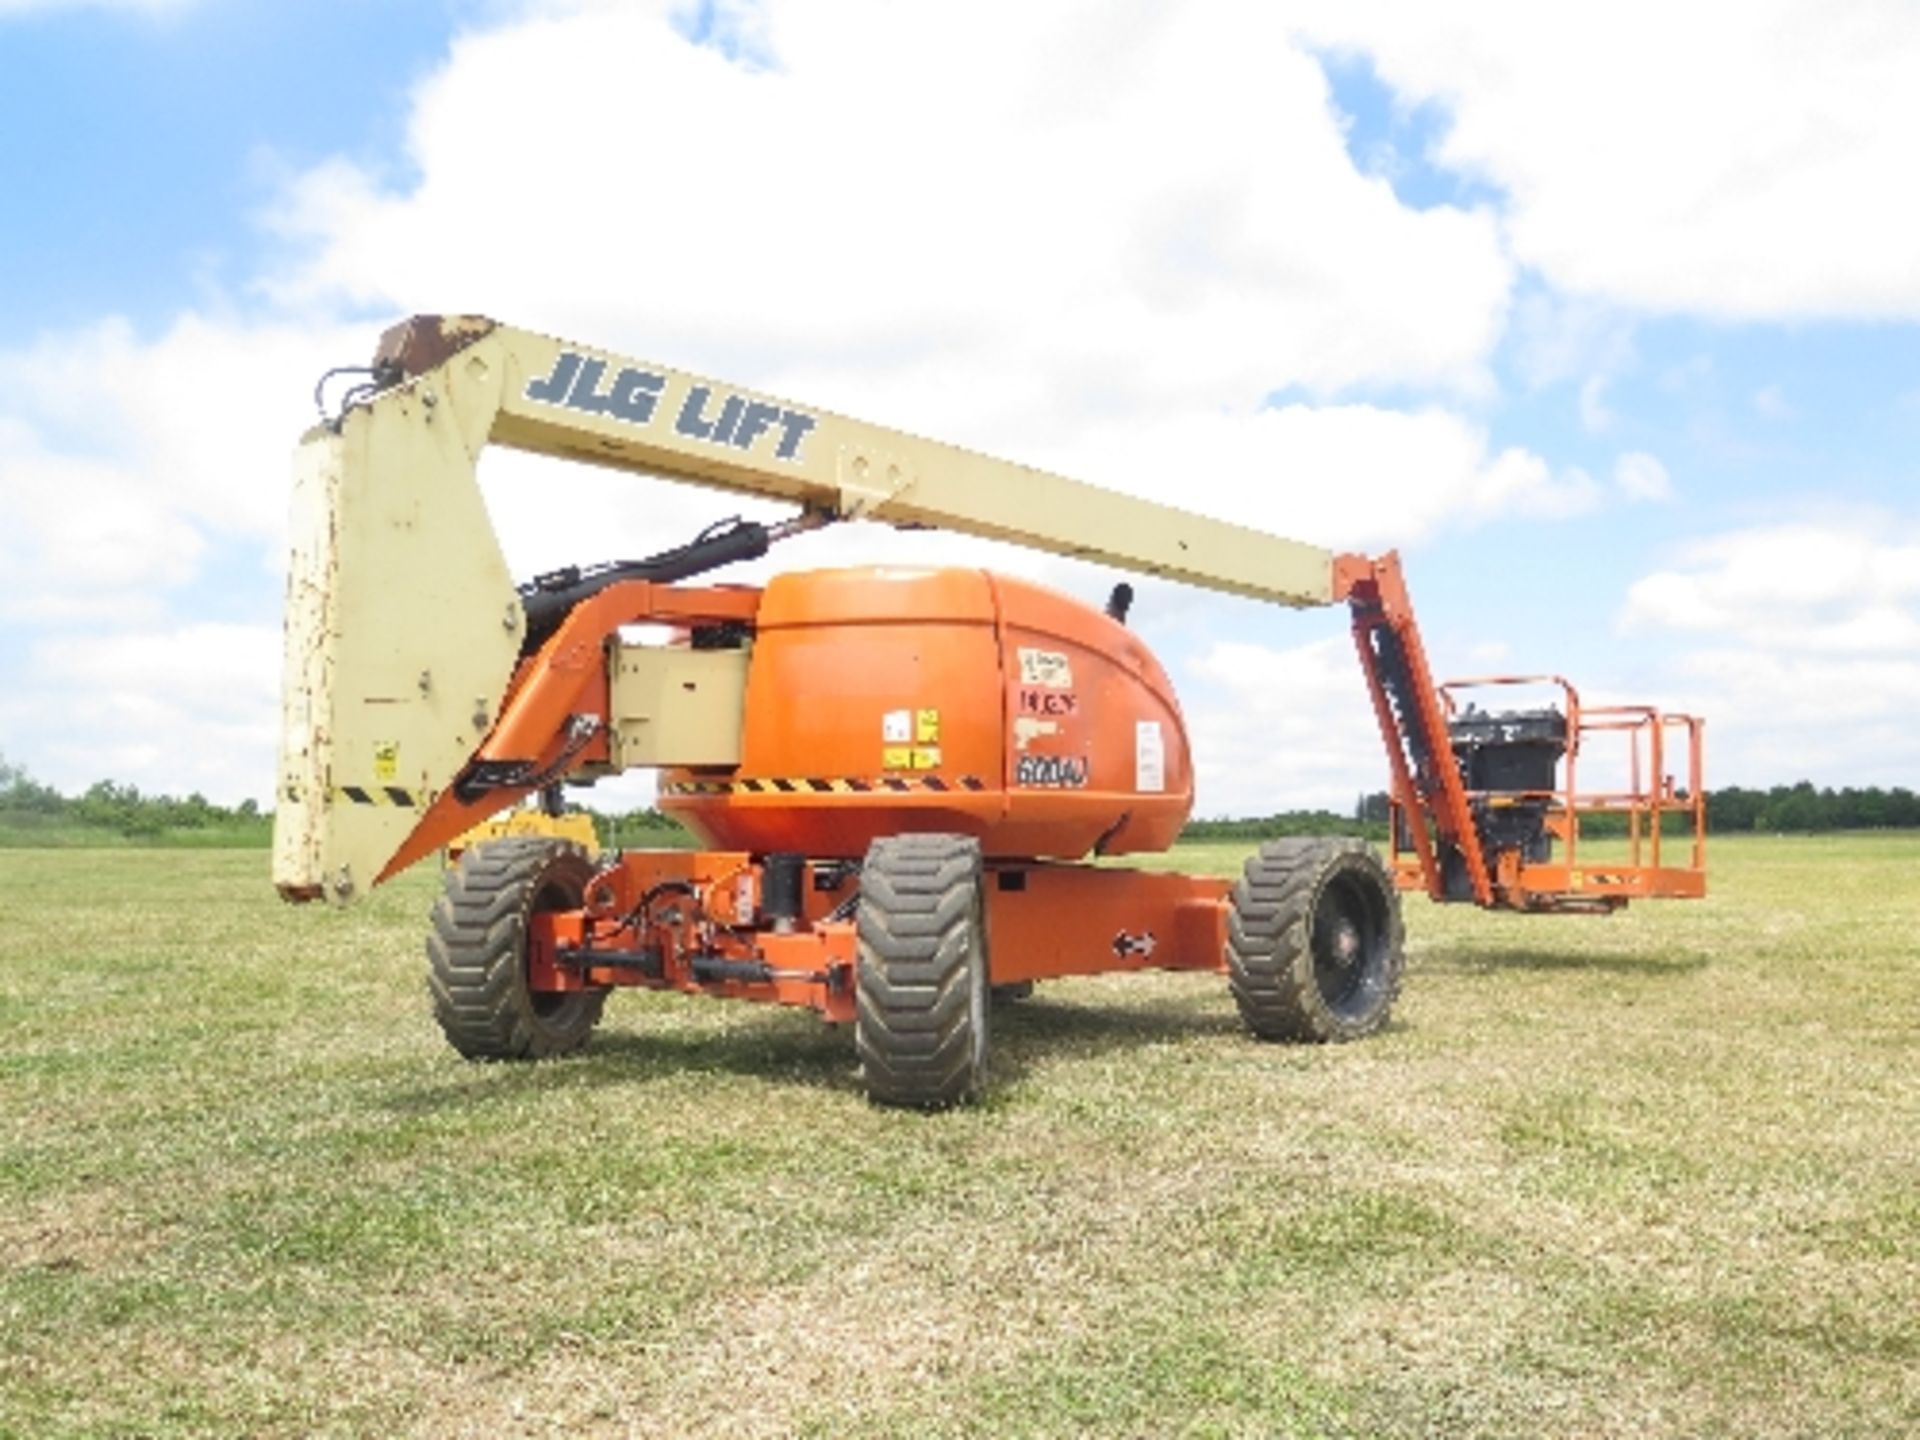 JLG 600AJ artic boom 2637 hrs 2005 143276ALL LOTS are SOLD AS SEEN WITHOUT WARRANTY expressed, given